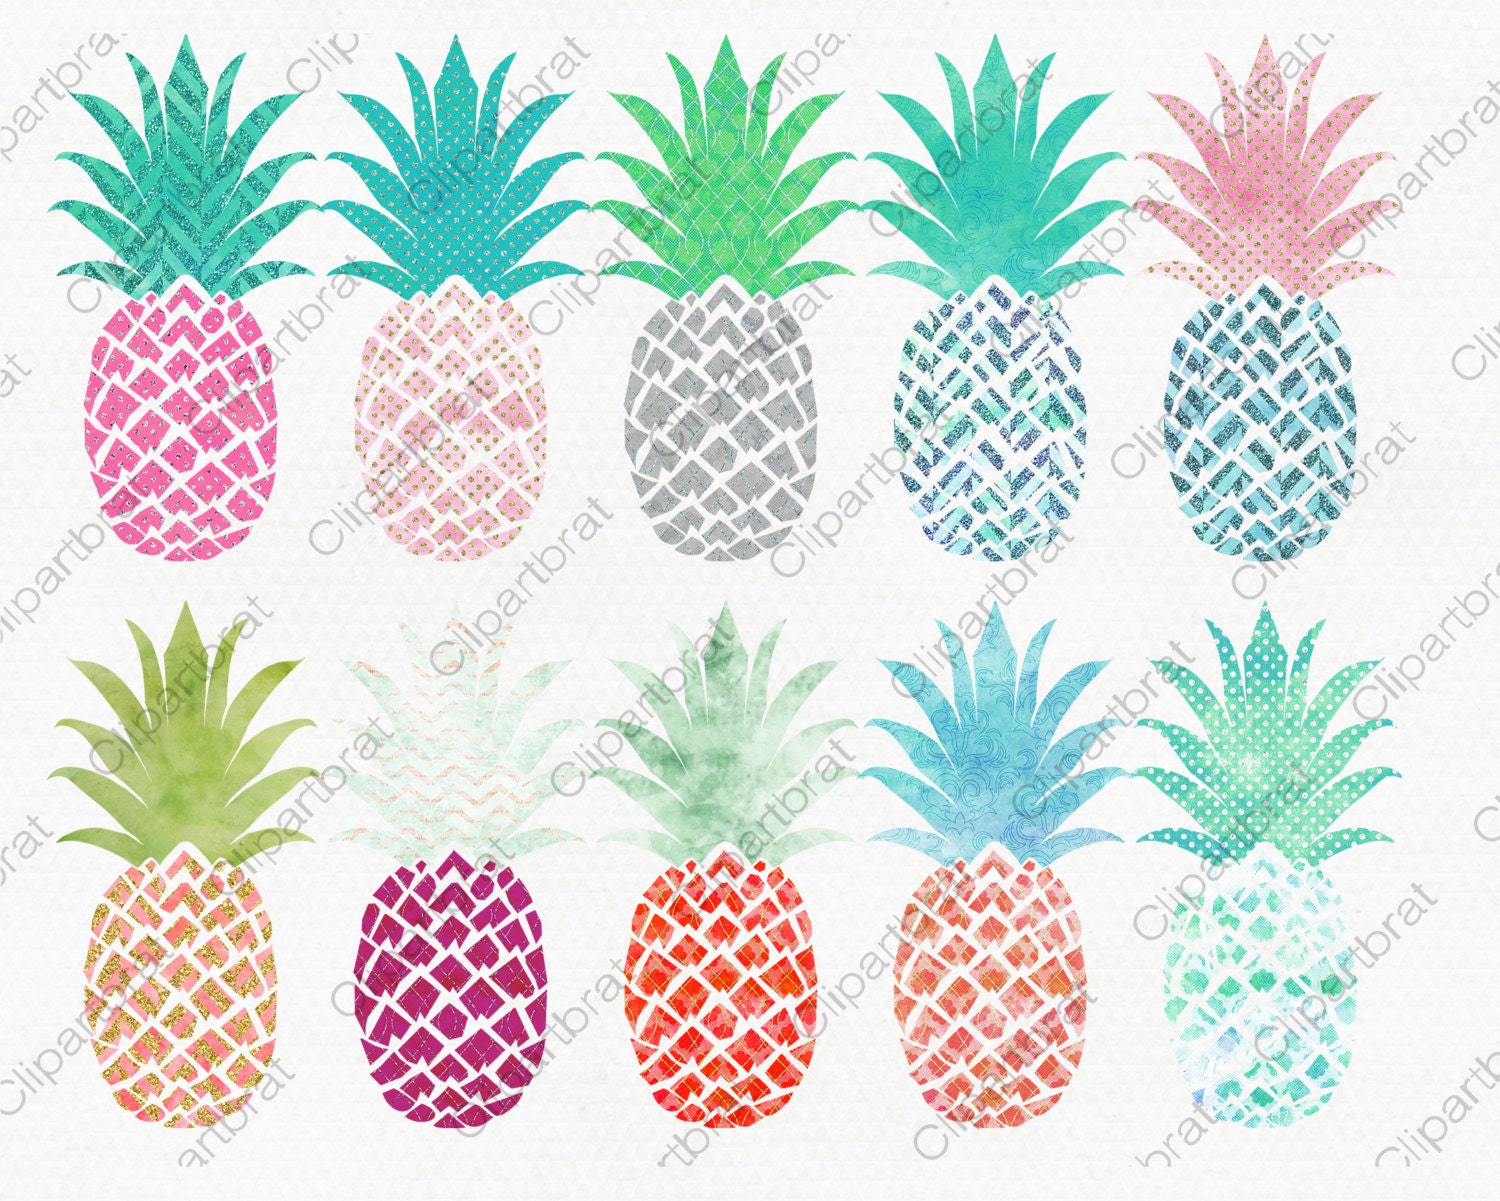 Download WATERCOLOR PINEAPPLE Clipart Commercial Use Clip art Fun Tropical Clipart with Gold Metallic ...